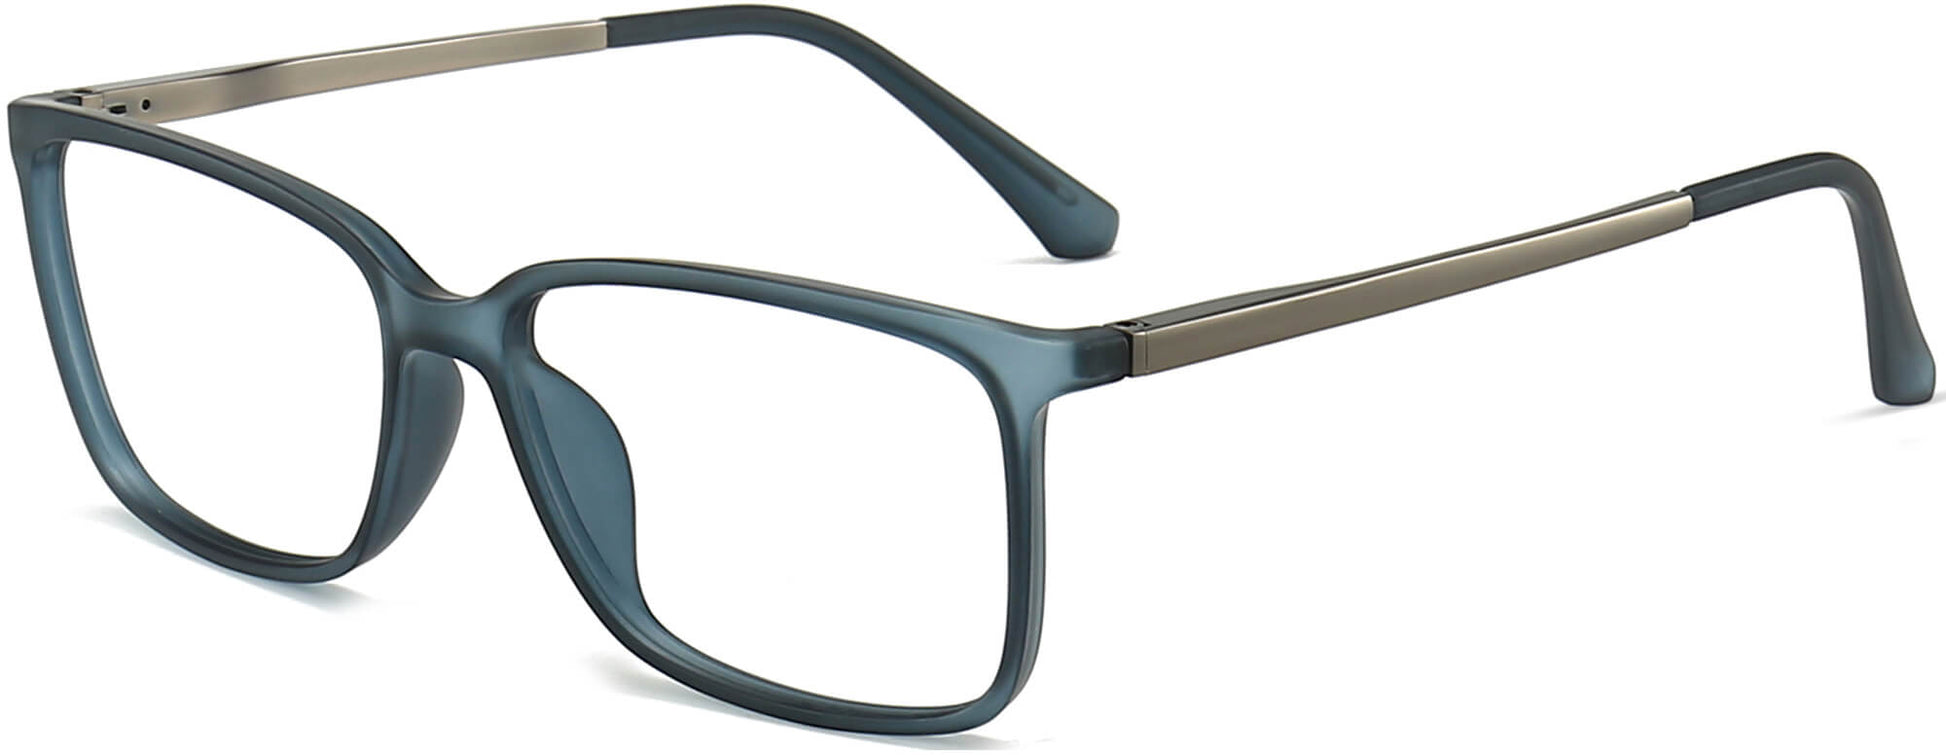 Ronald Square Blue Eyeglasses from ANRRI